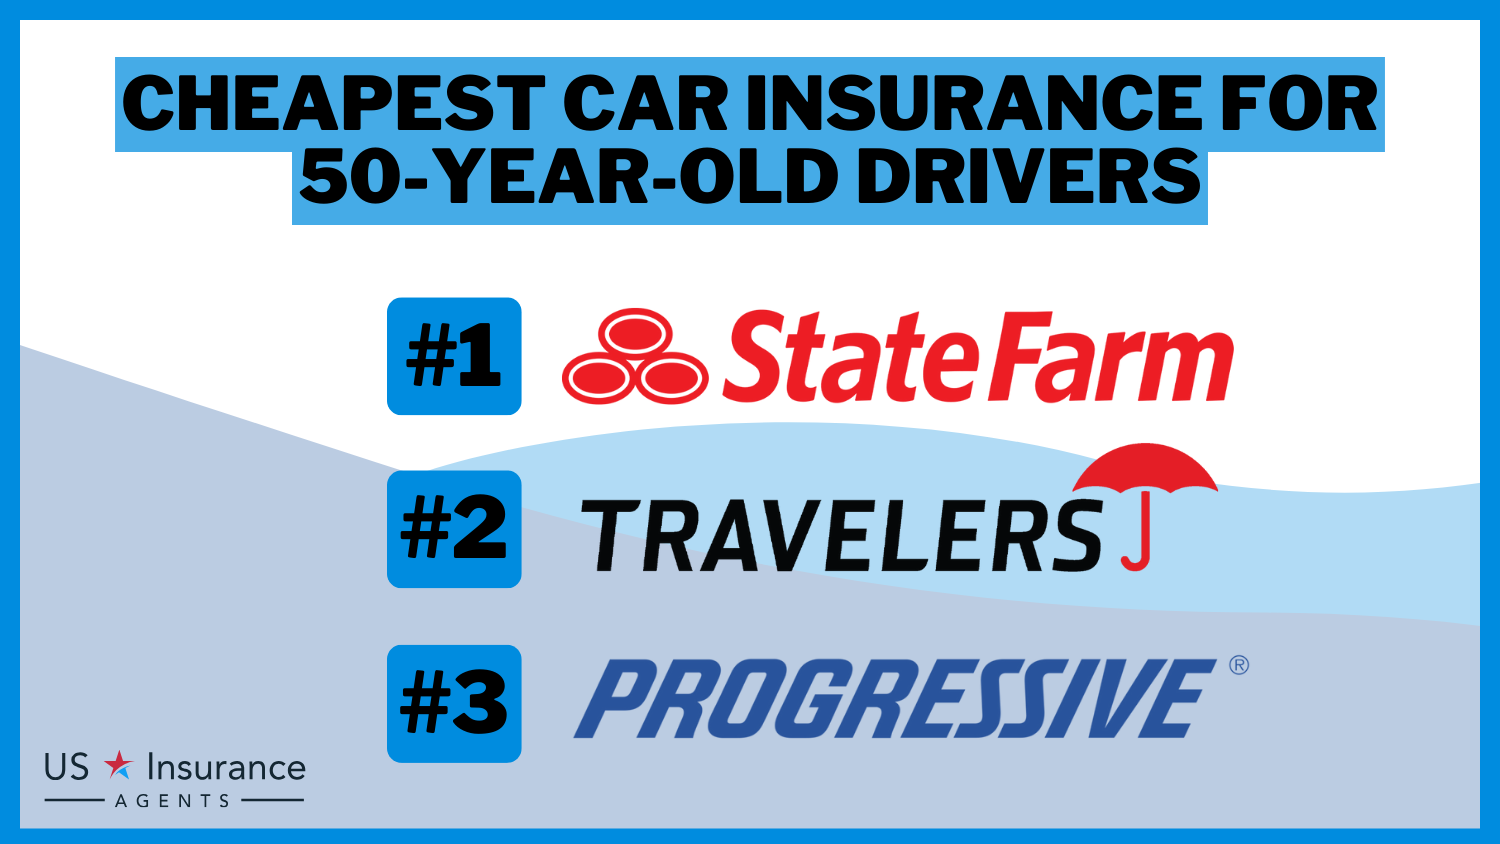 State Farm, Travelers, Progressive: Cheapest Car Insurance for 50-Year-Old Drivers